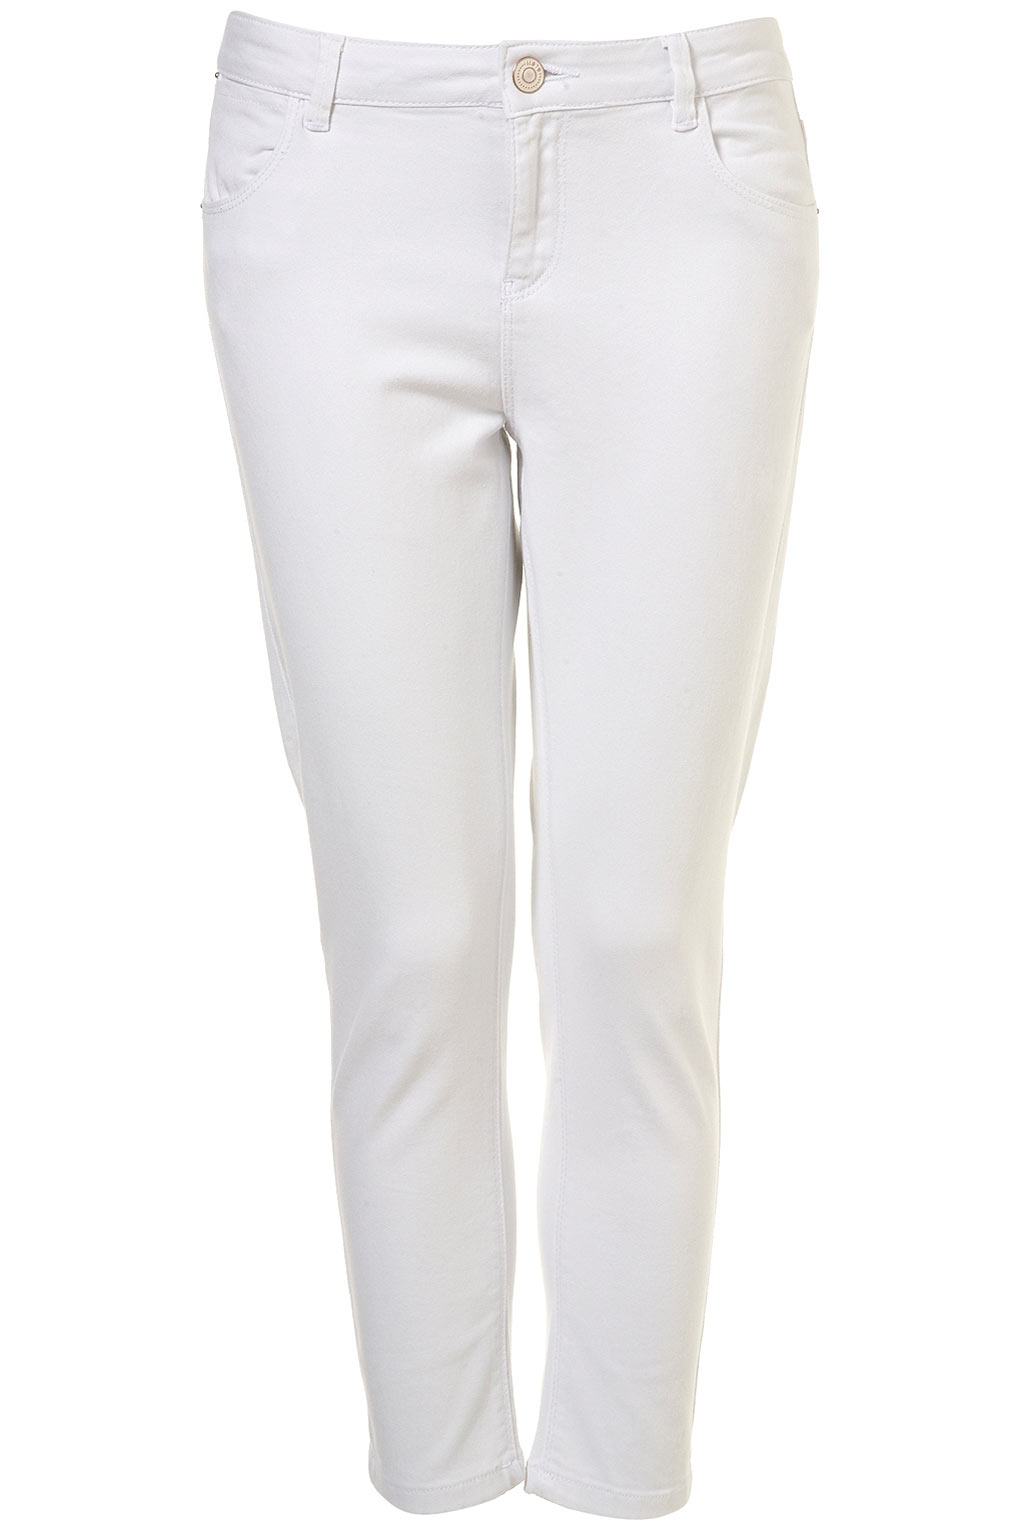 Essential: White Jeans | South Molton St Style